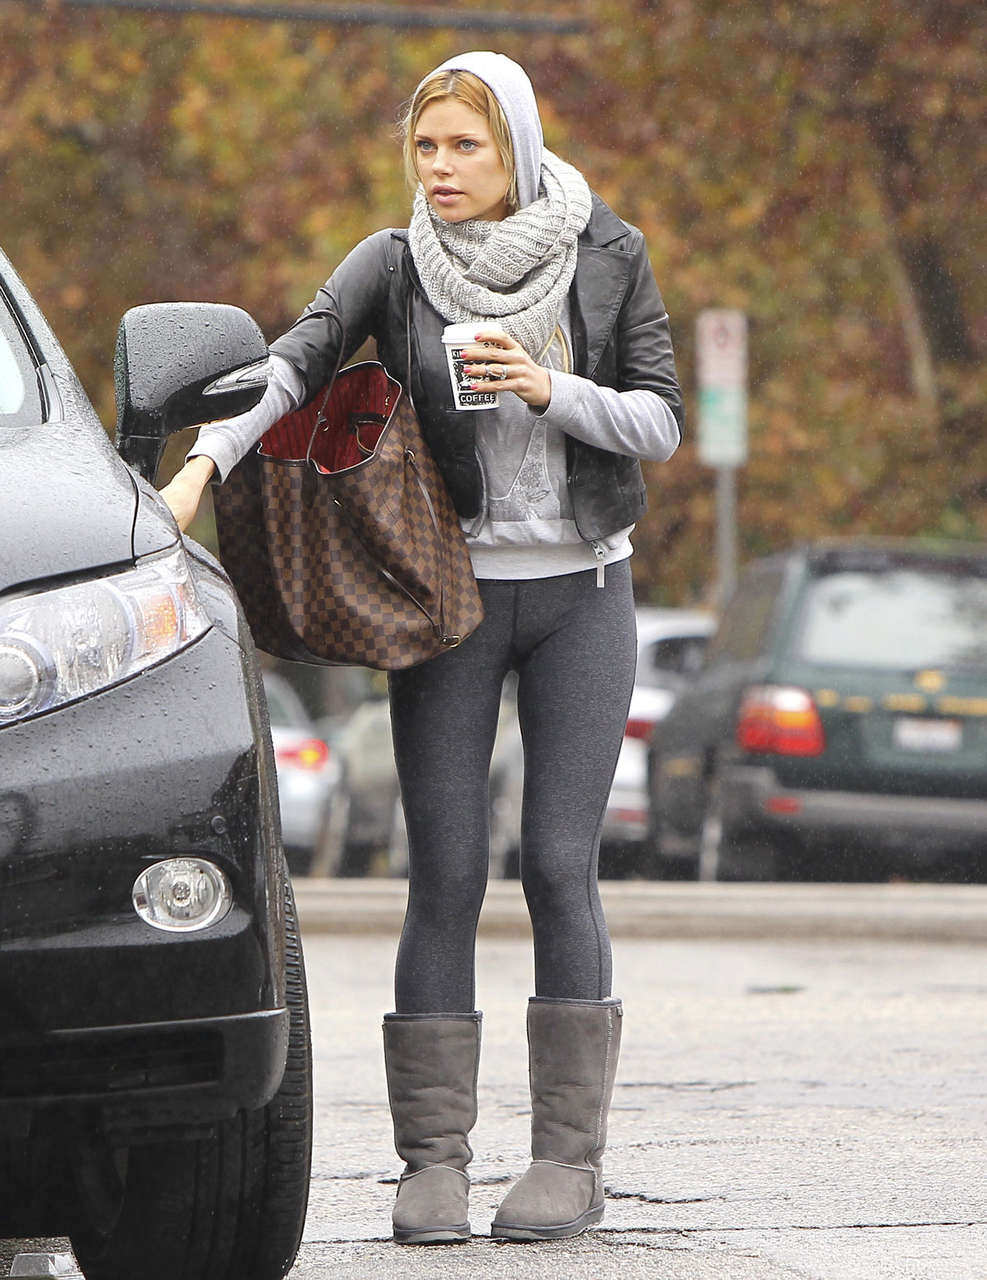 Sophie Monk Tights Kings Road Cafe Studio City